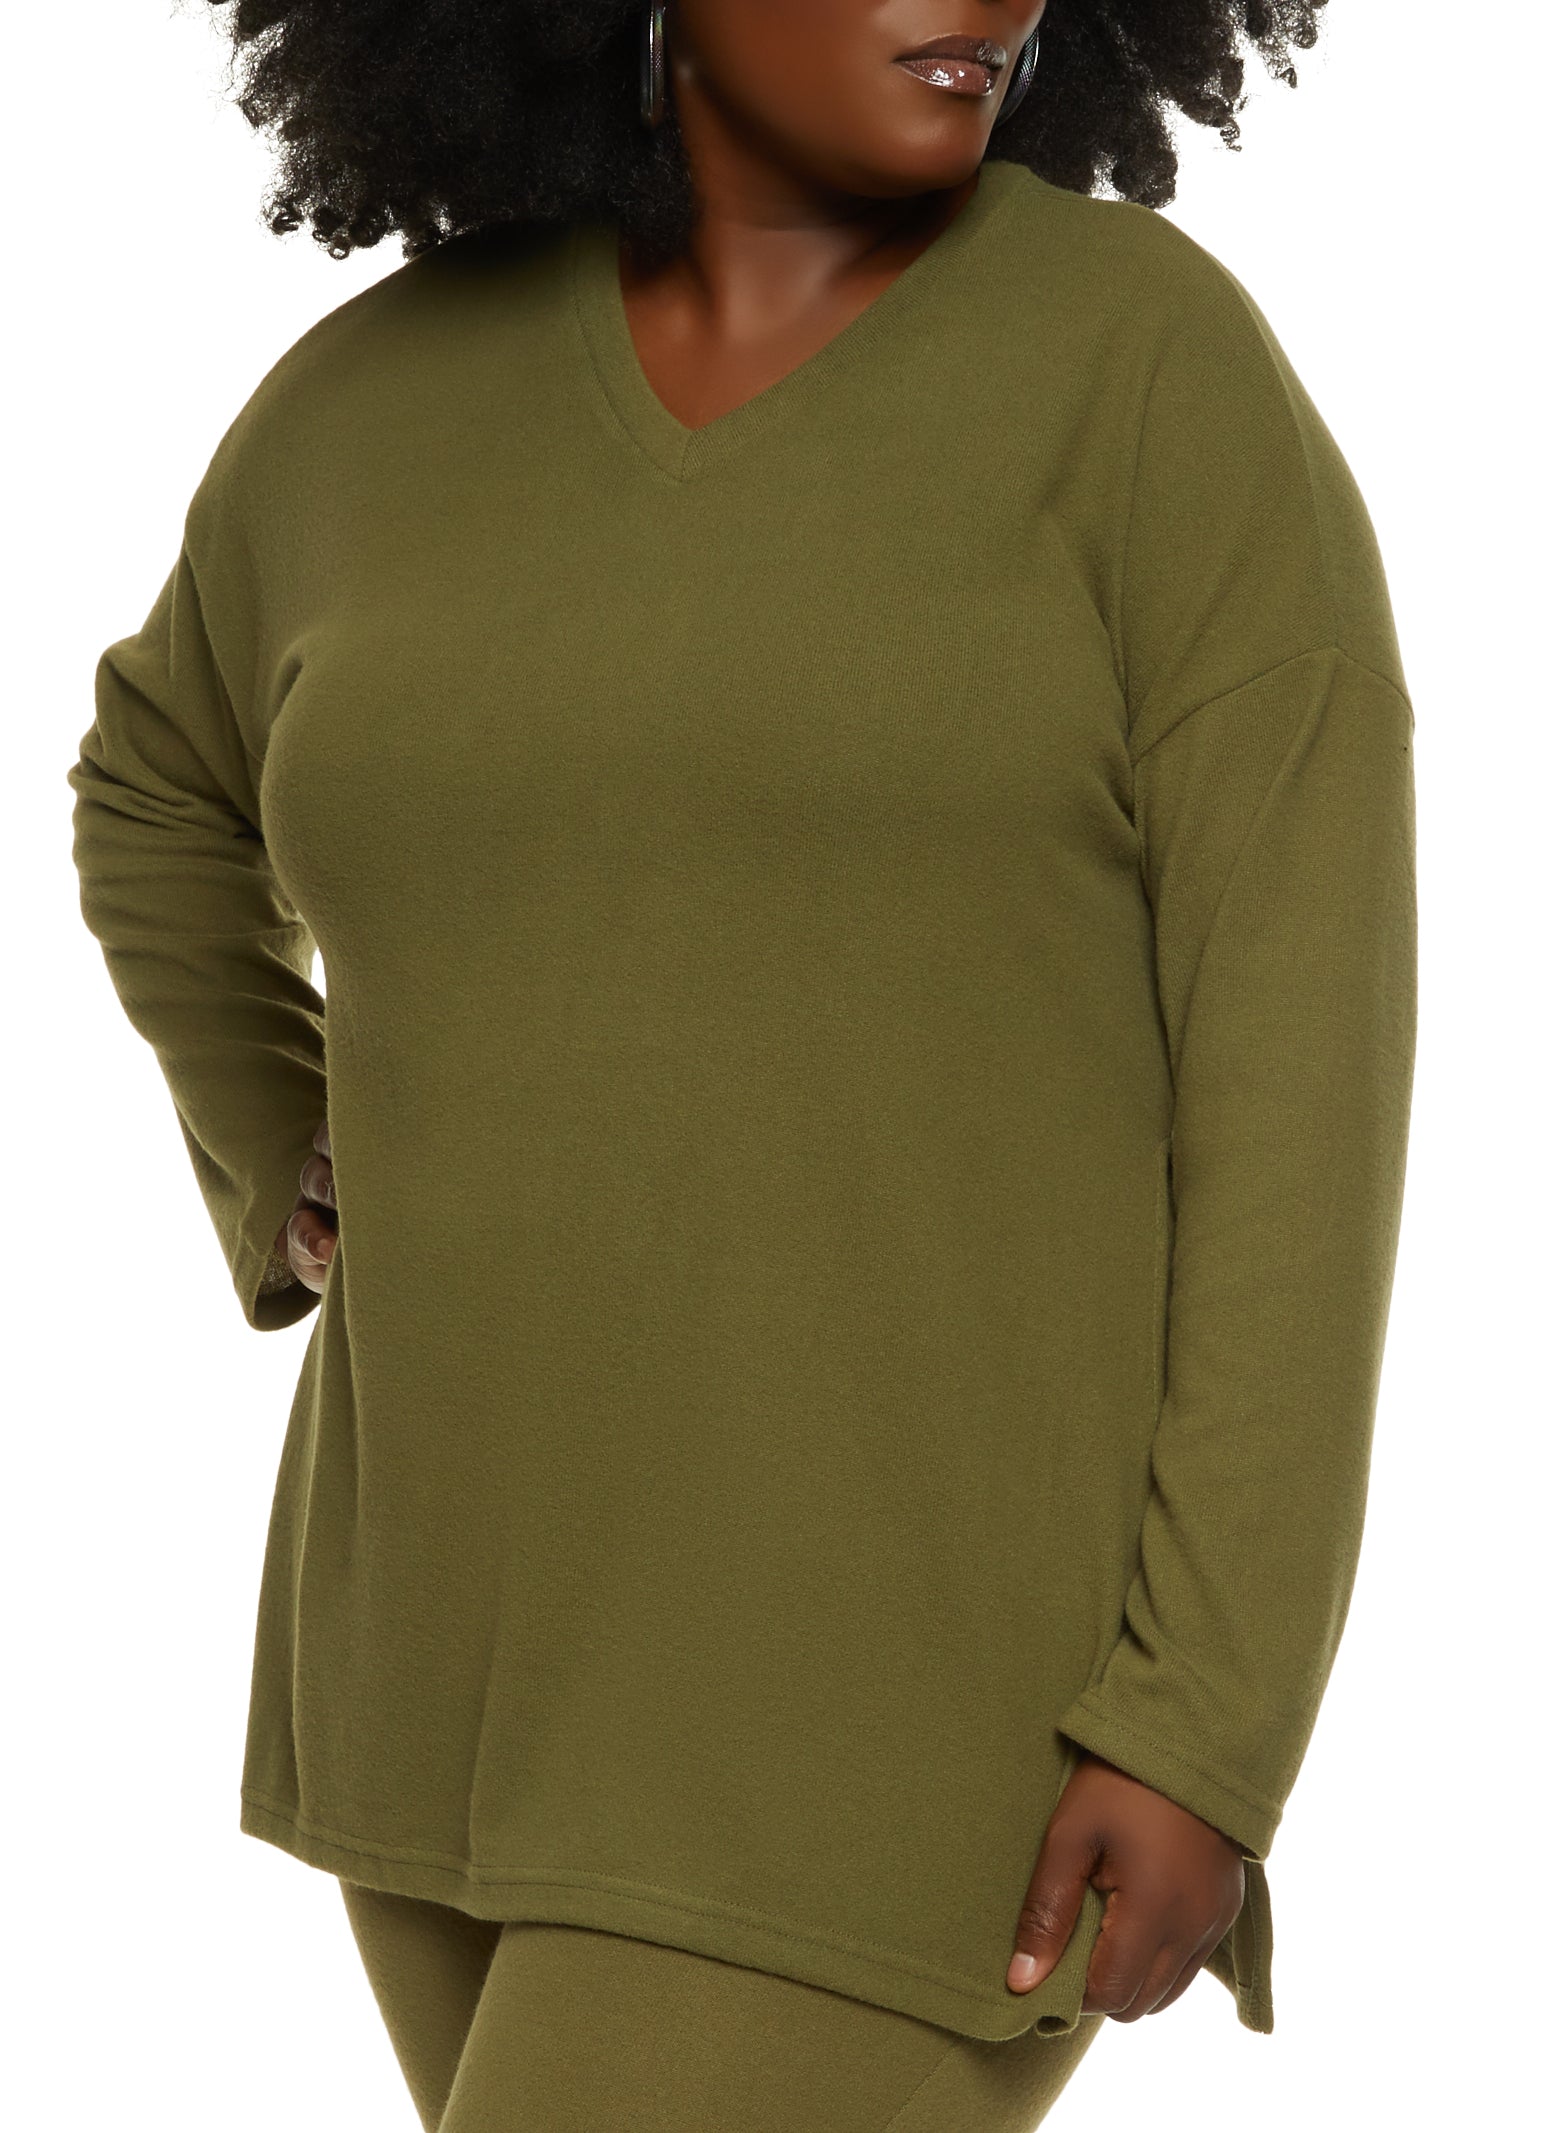 Womens Plus Size Brushed Knit V Neck Tunic Top, Green, Size 1X